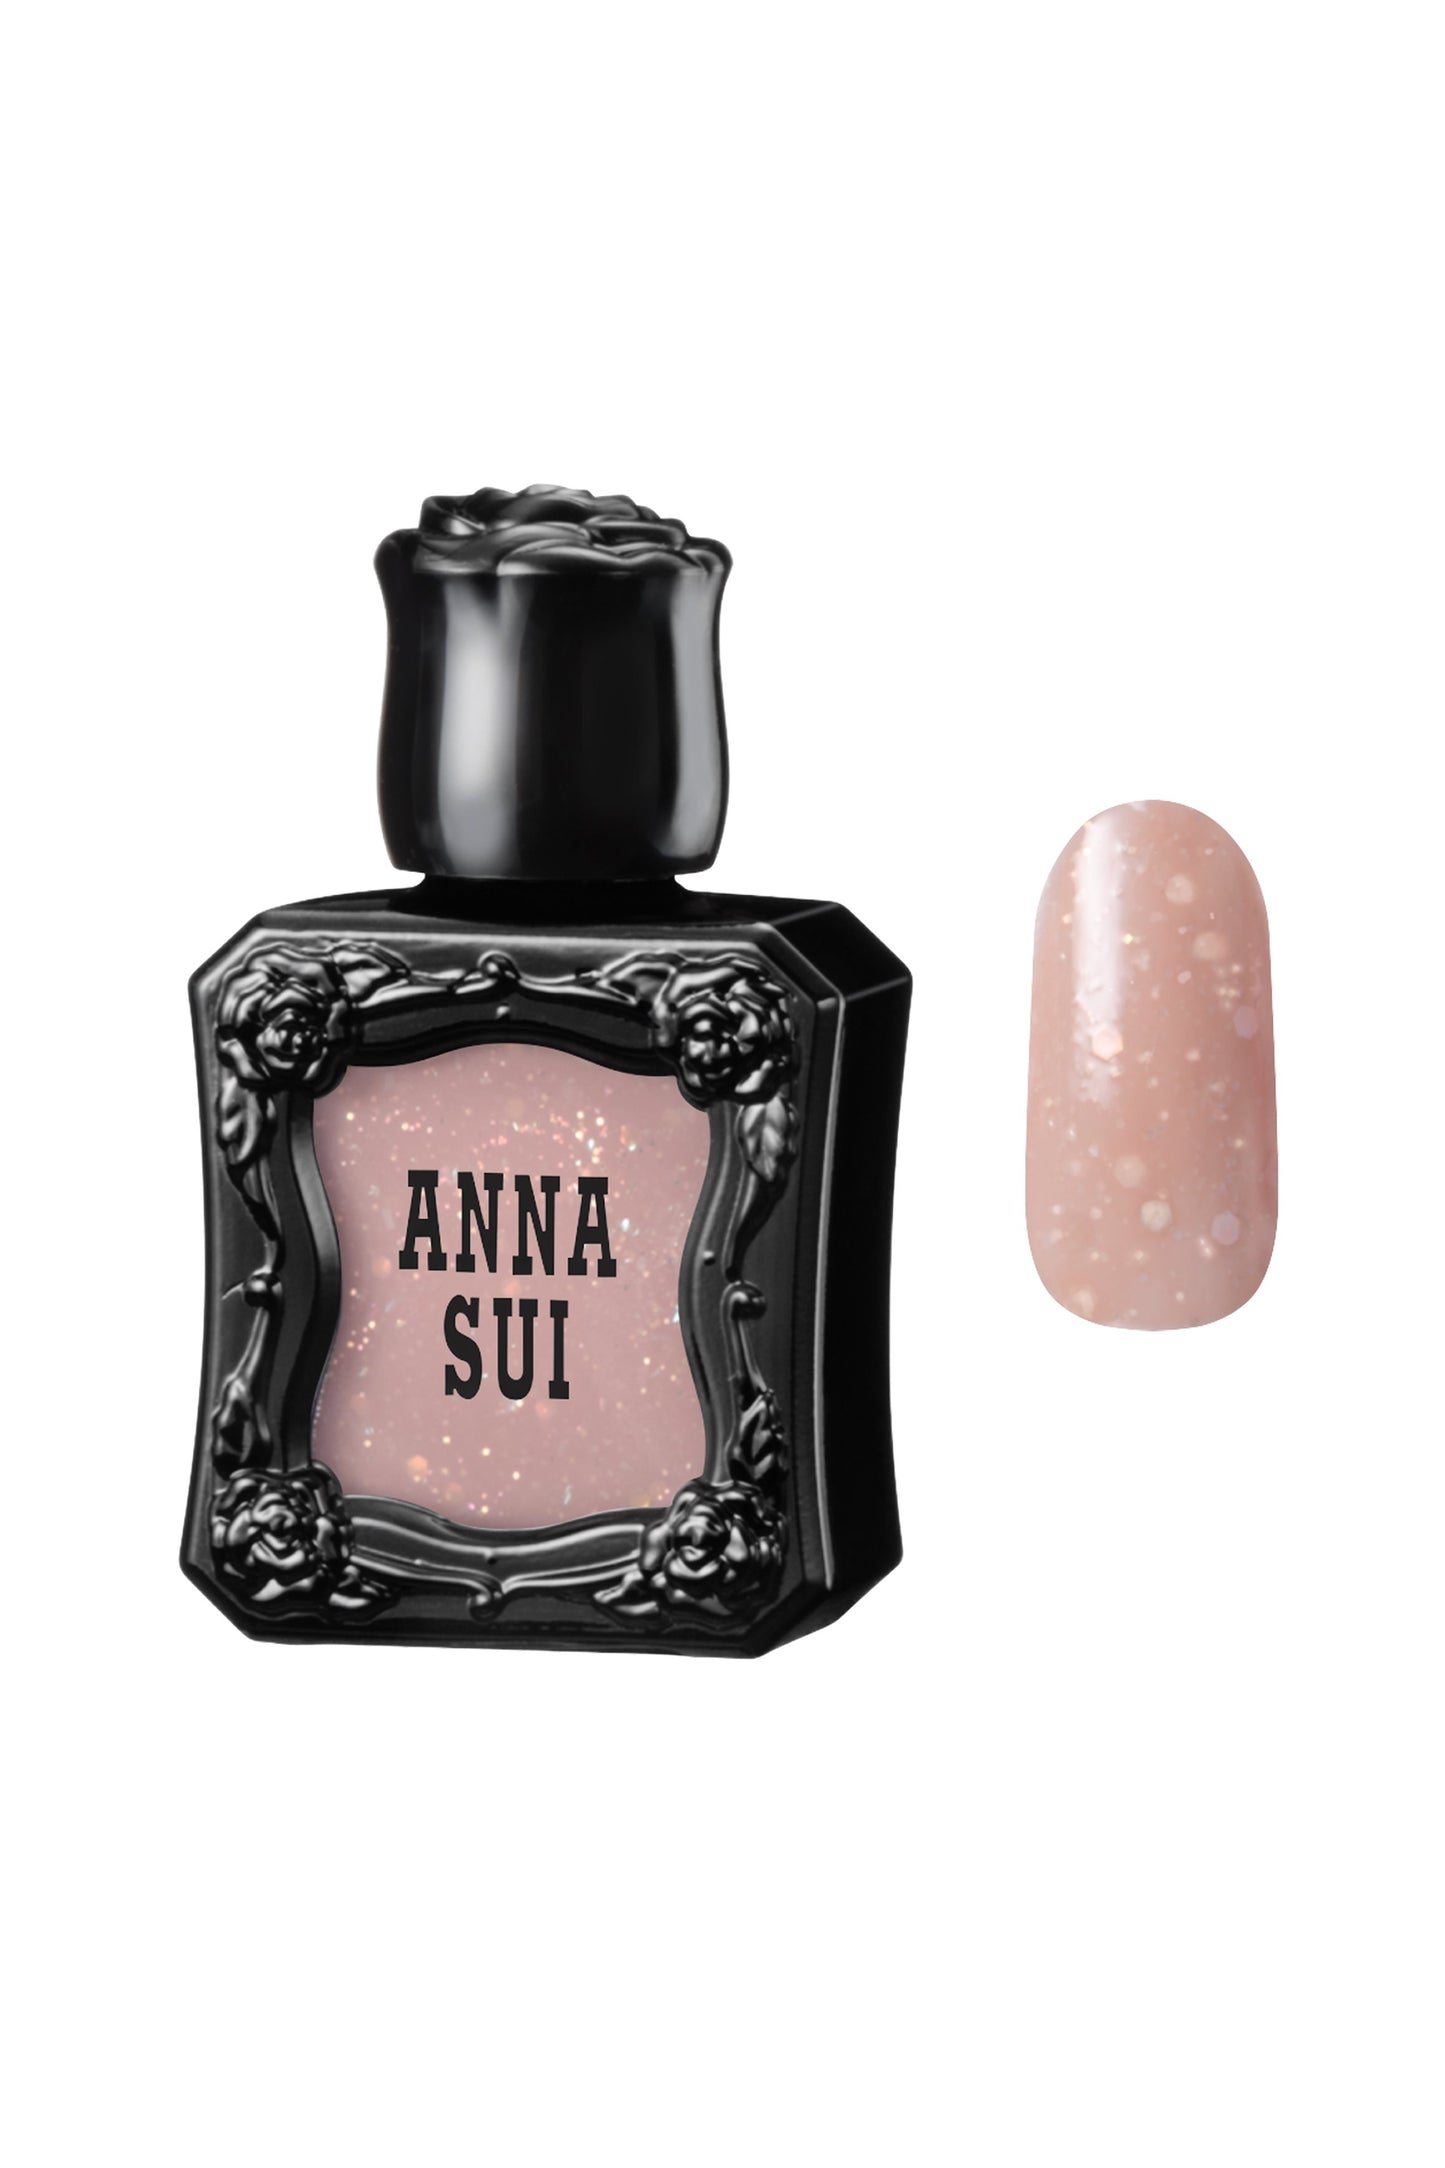 SHINY BEIGE Nail Polish bottle raised rose pattern, Anna Sui in black over nail colors in bottle front